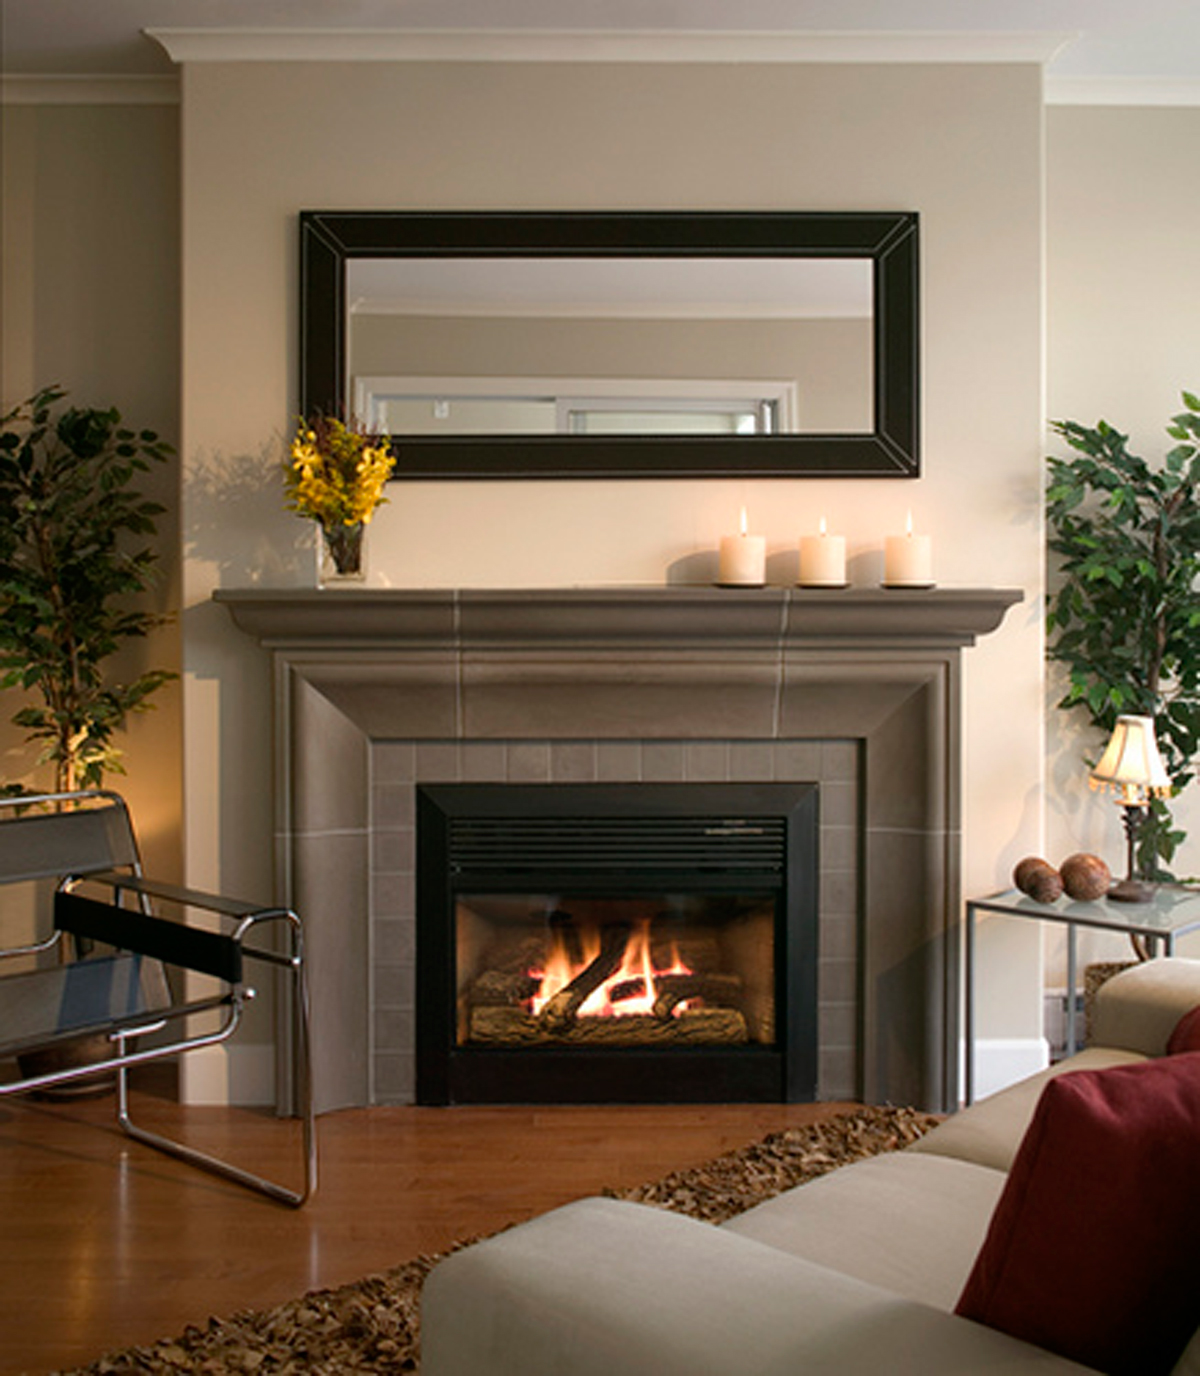 Amazing Tips to Décor Your Fire Place